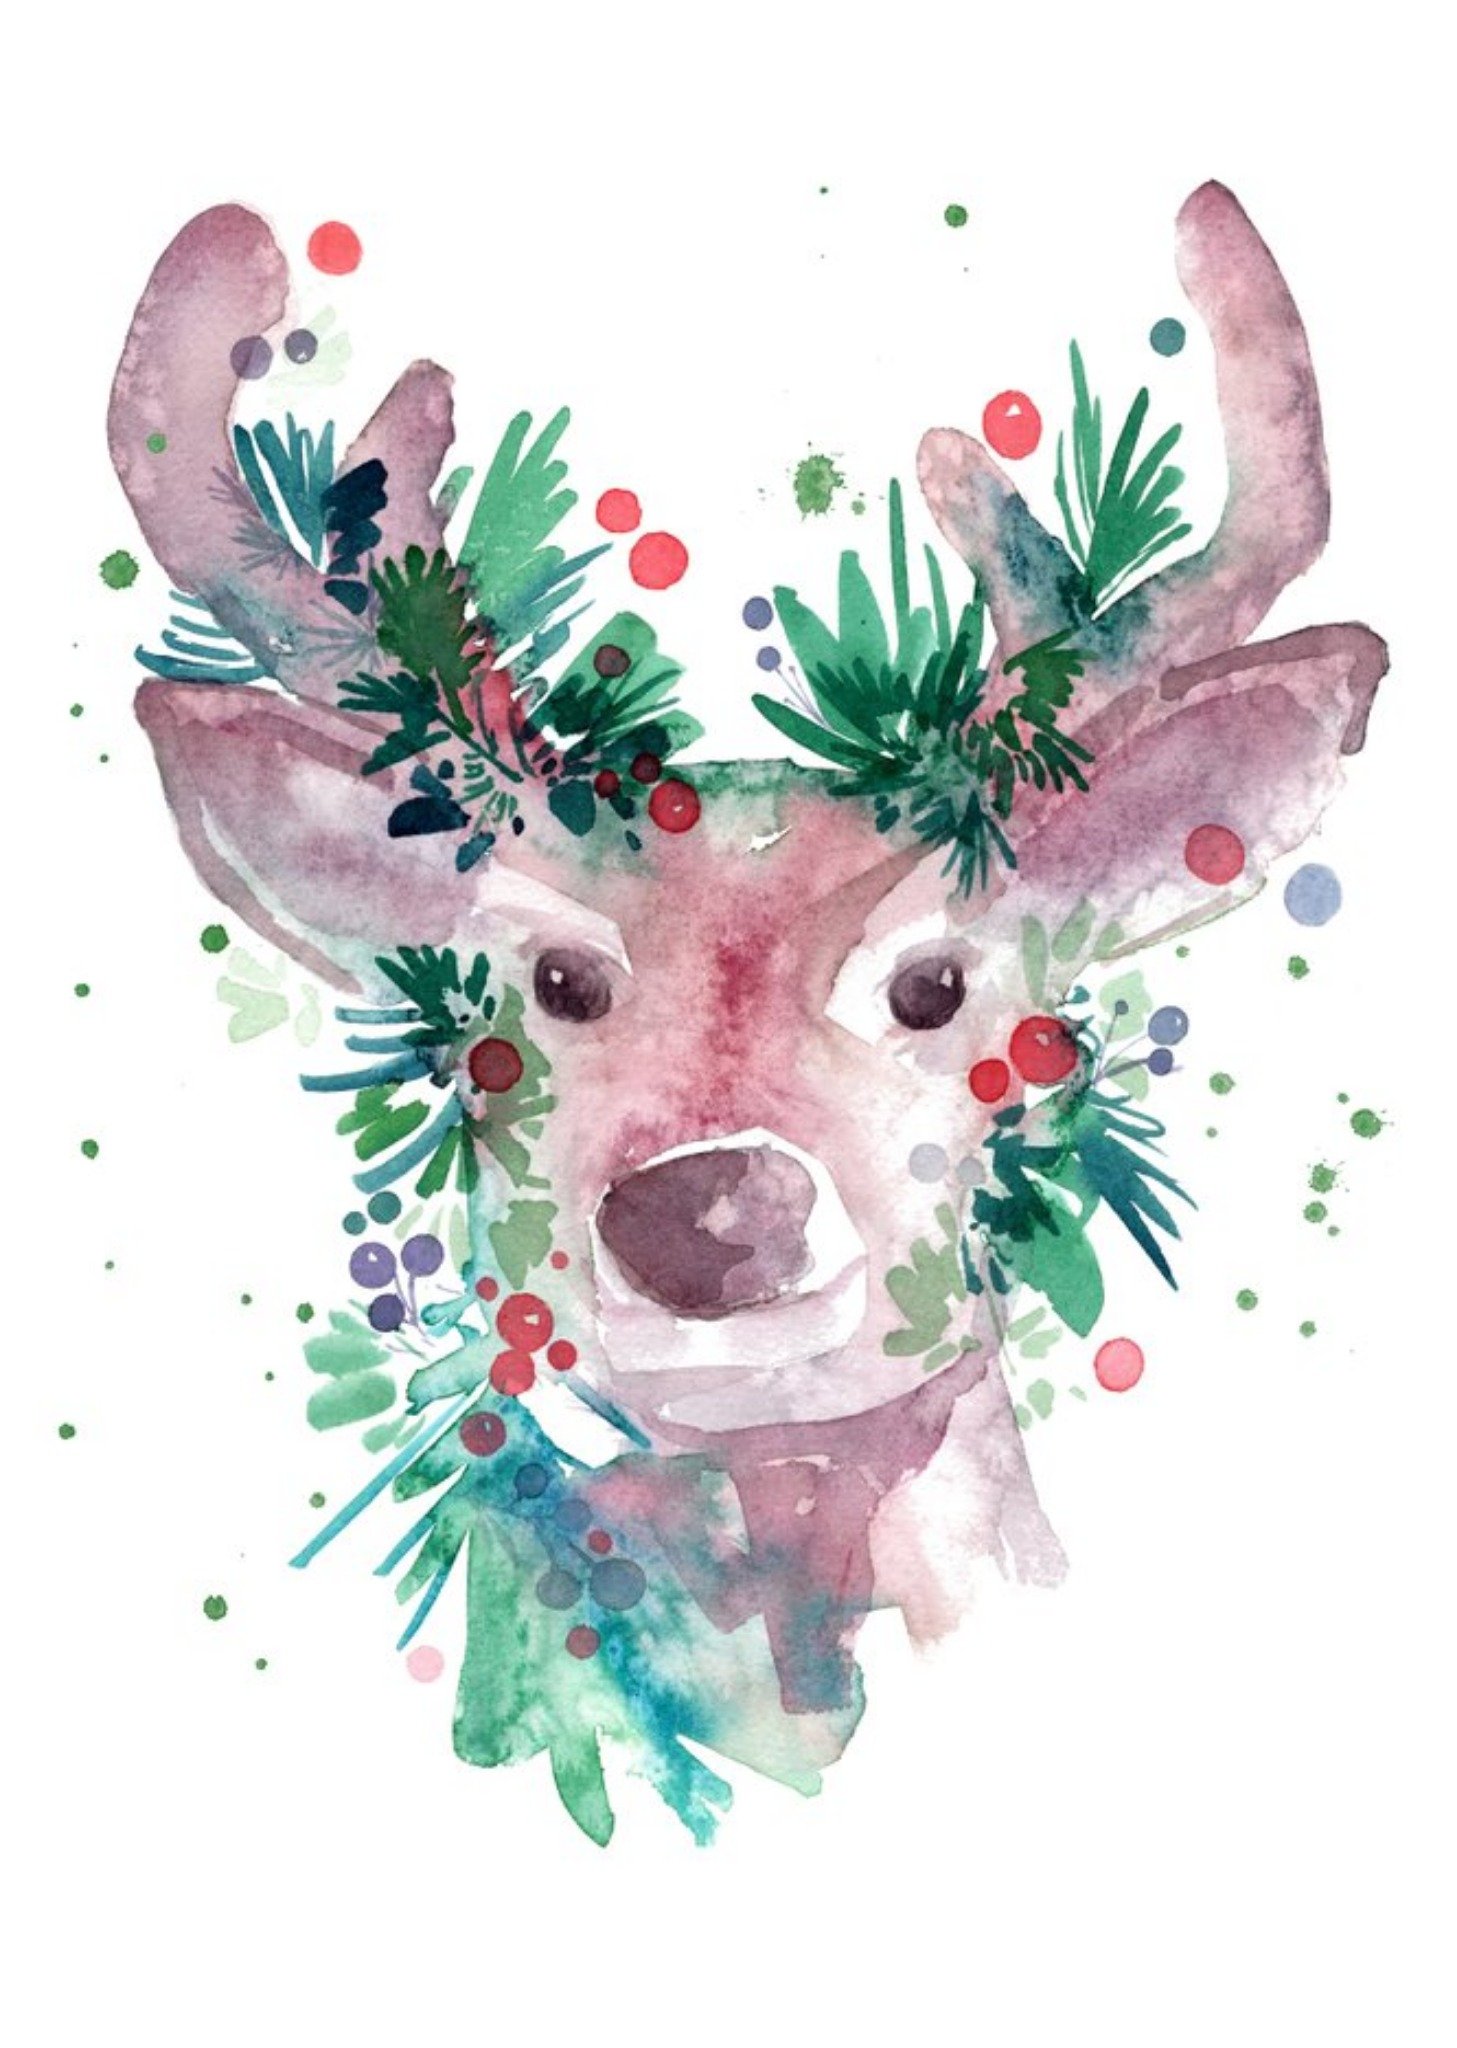 Moonpig Beautiful Reindeer With Holly Watercolour Illustration Christmas Card, Large